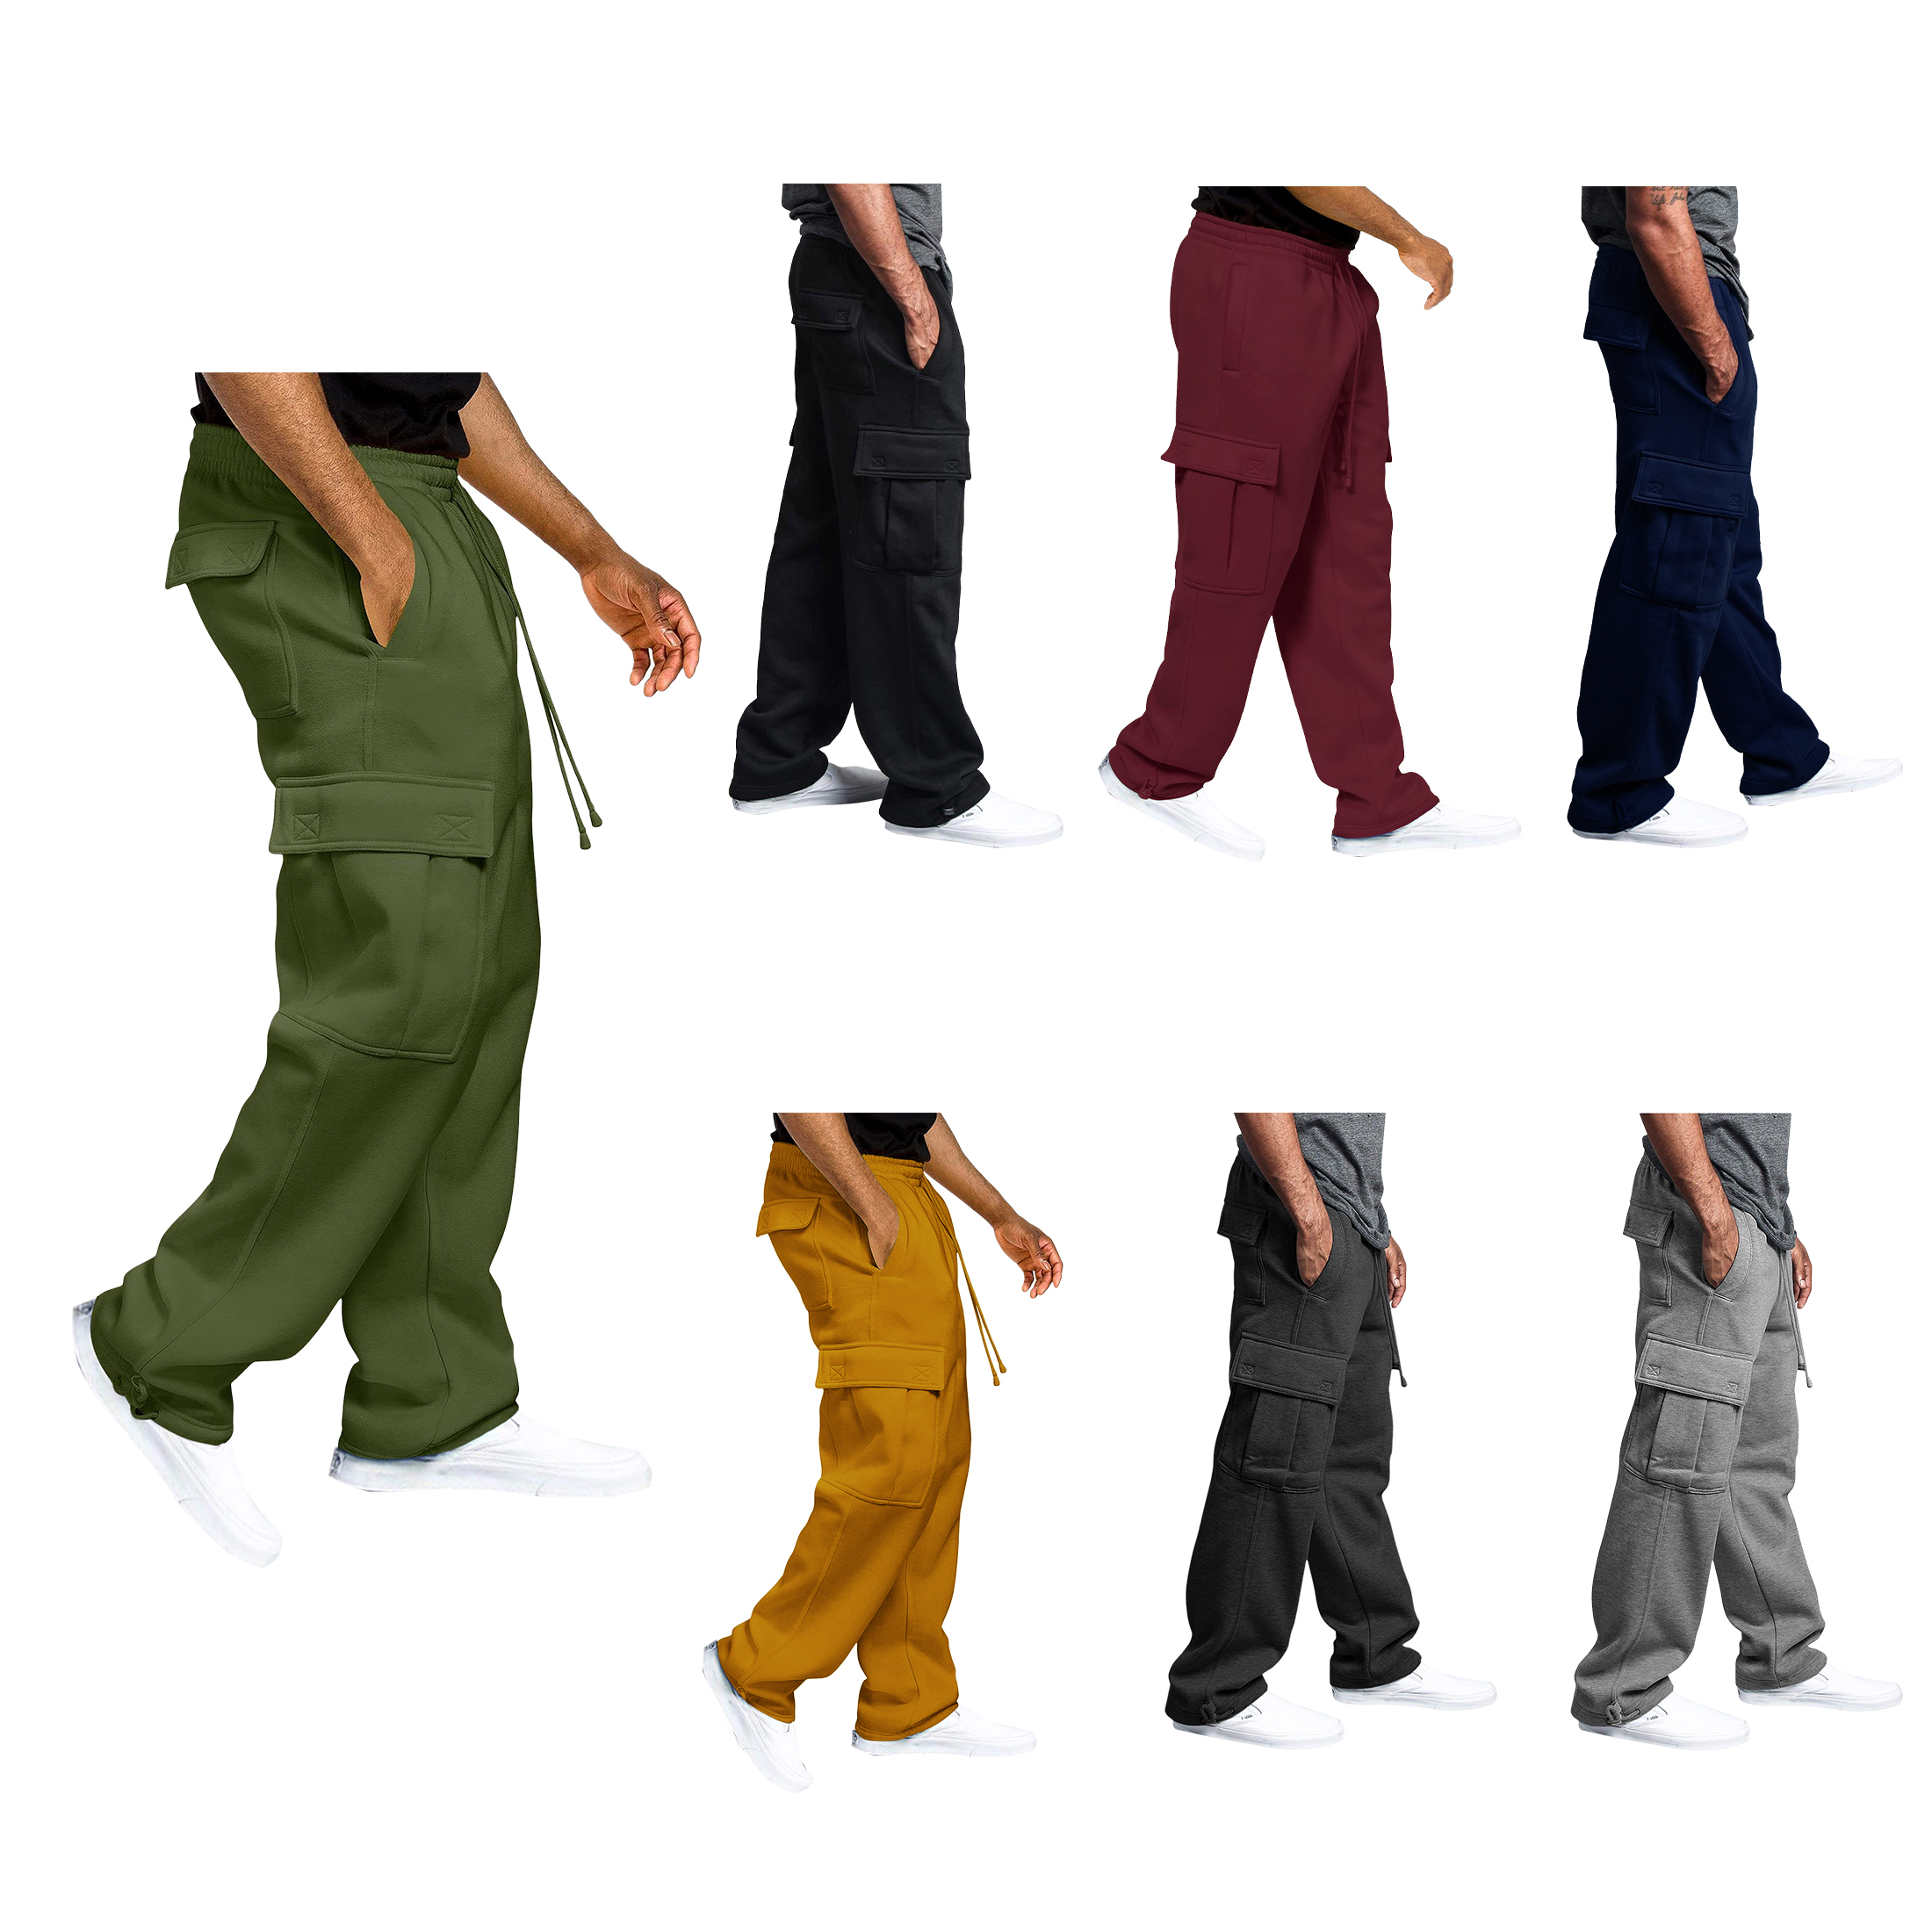 2-Pack: Men's Casual Solid Cargo Jogger Sweatpants With Pockets - L